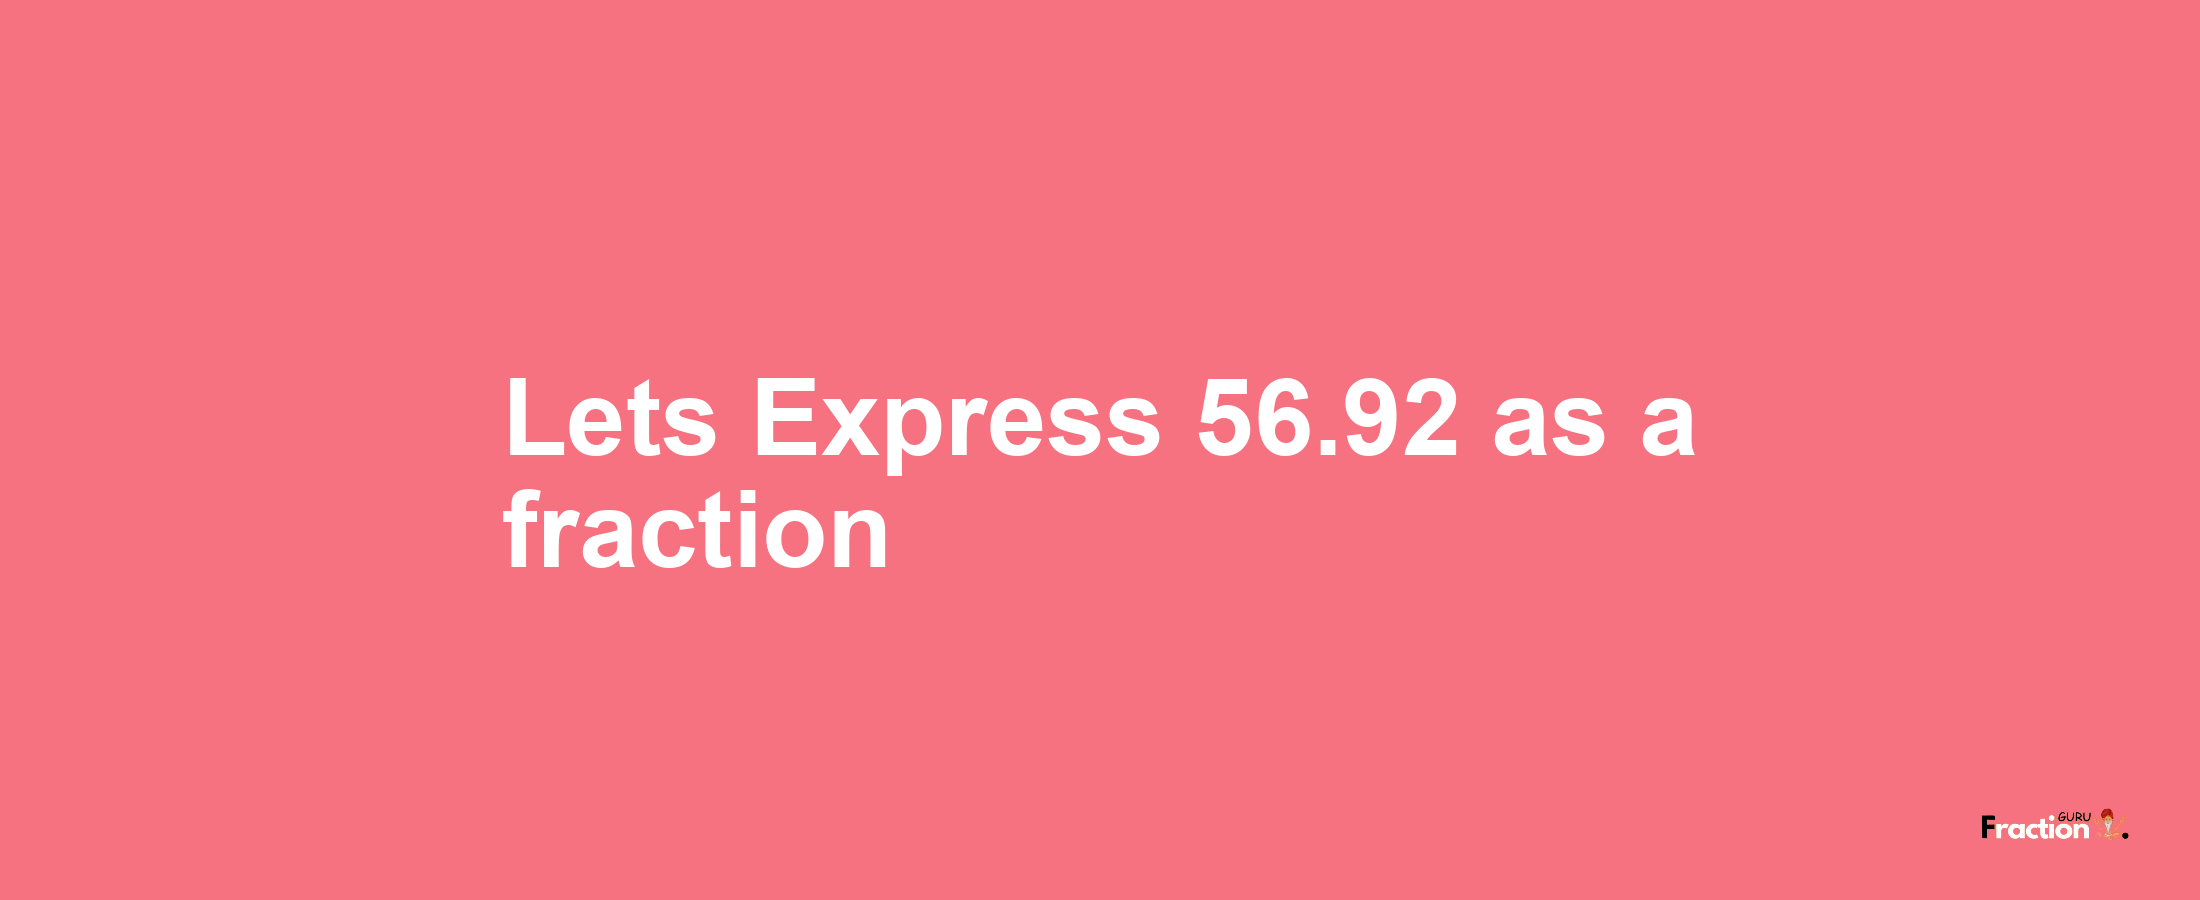 Lets Express 56.92 as afraction